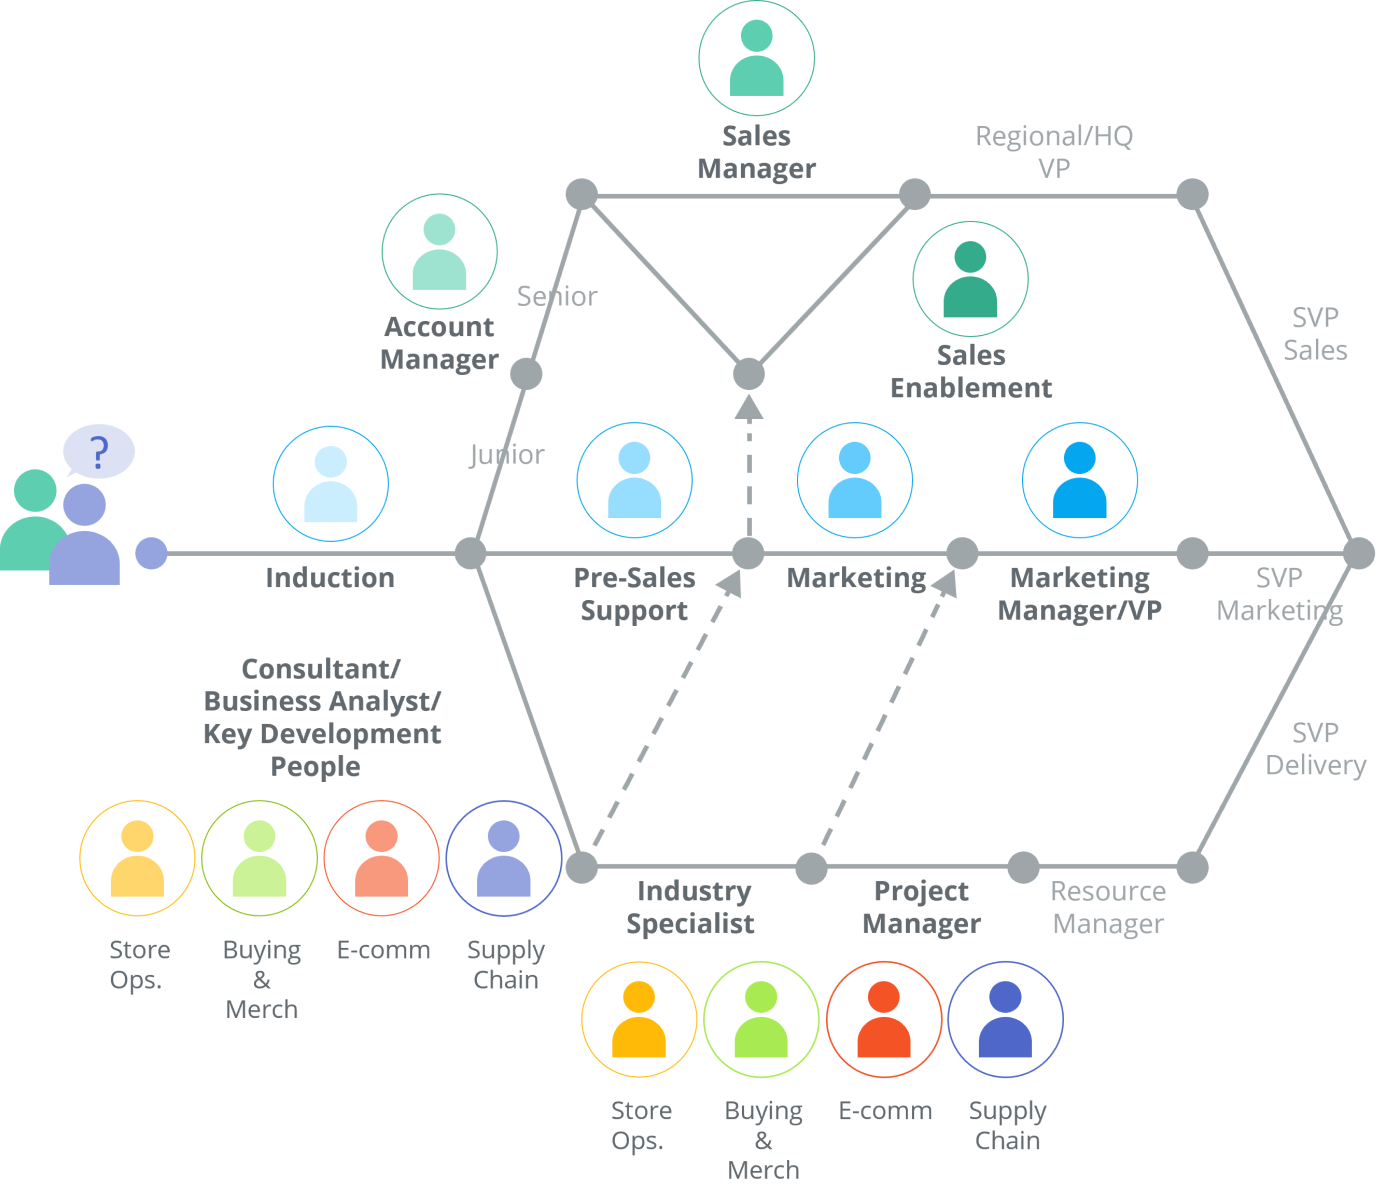 A career map showing the path options for a person within a technology supplier, consulting firm or systems integrator serving retail.